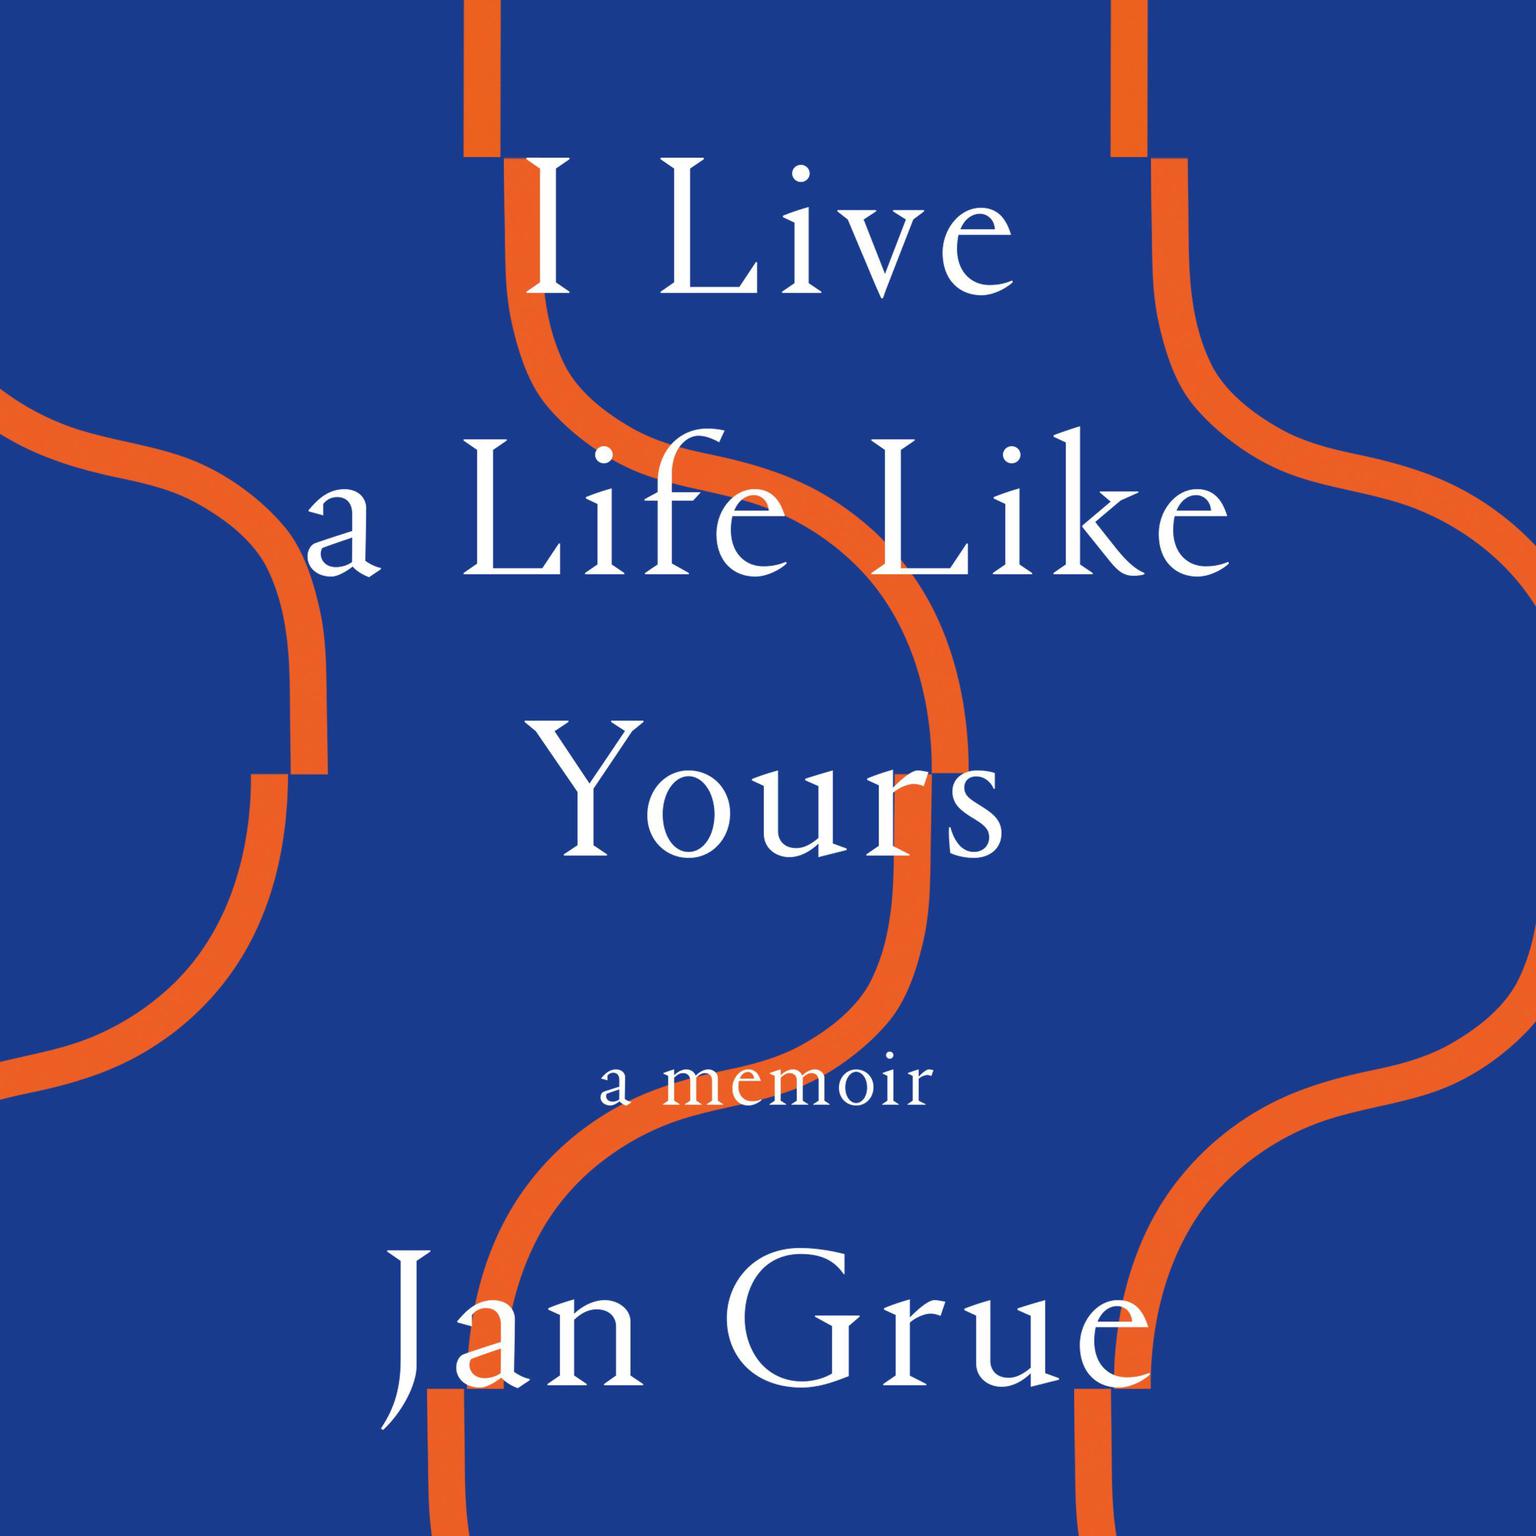 I Live a Life Like Yours: A Memoir Audiobook, by Jan Grue